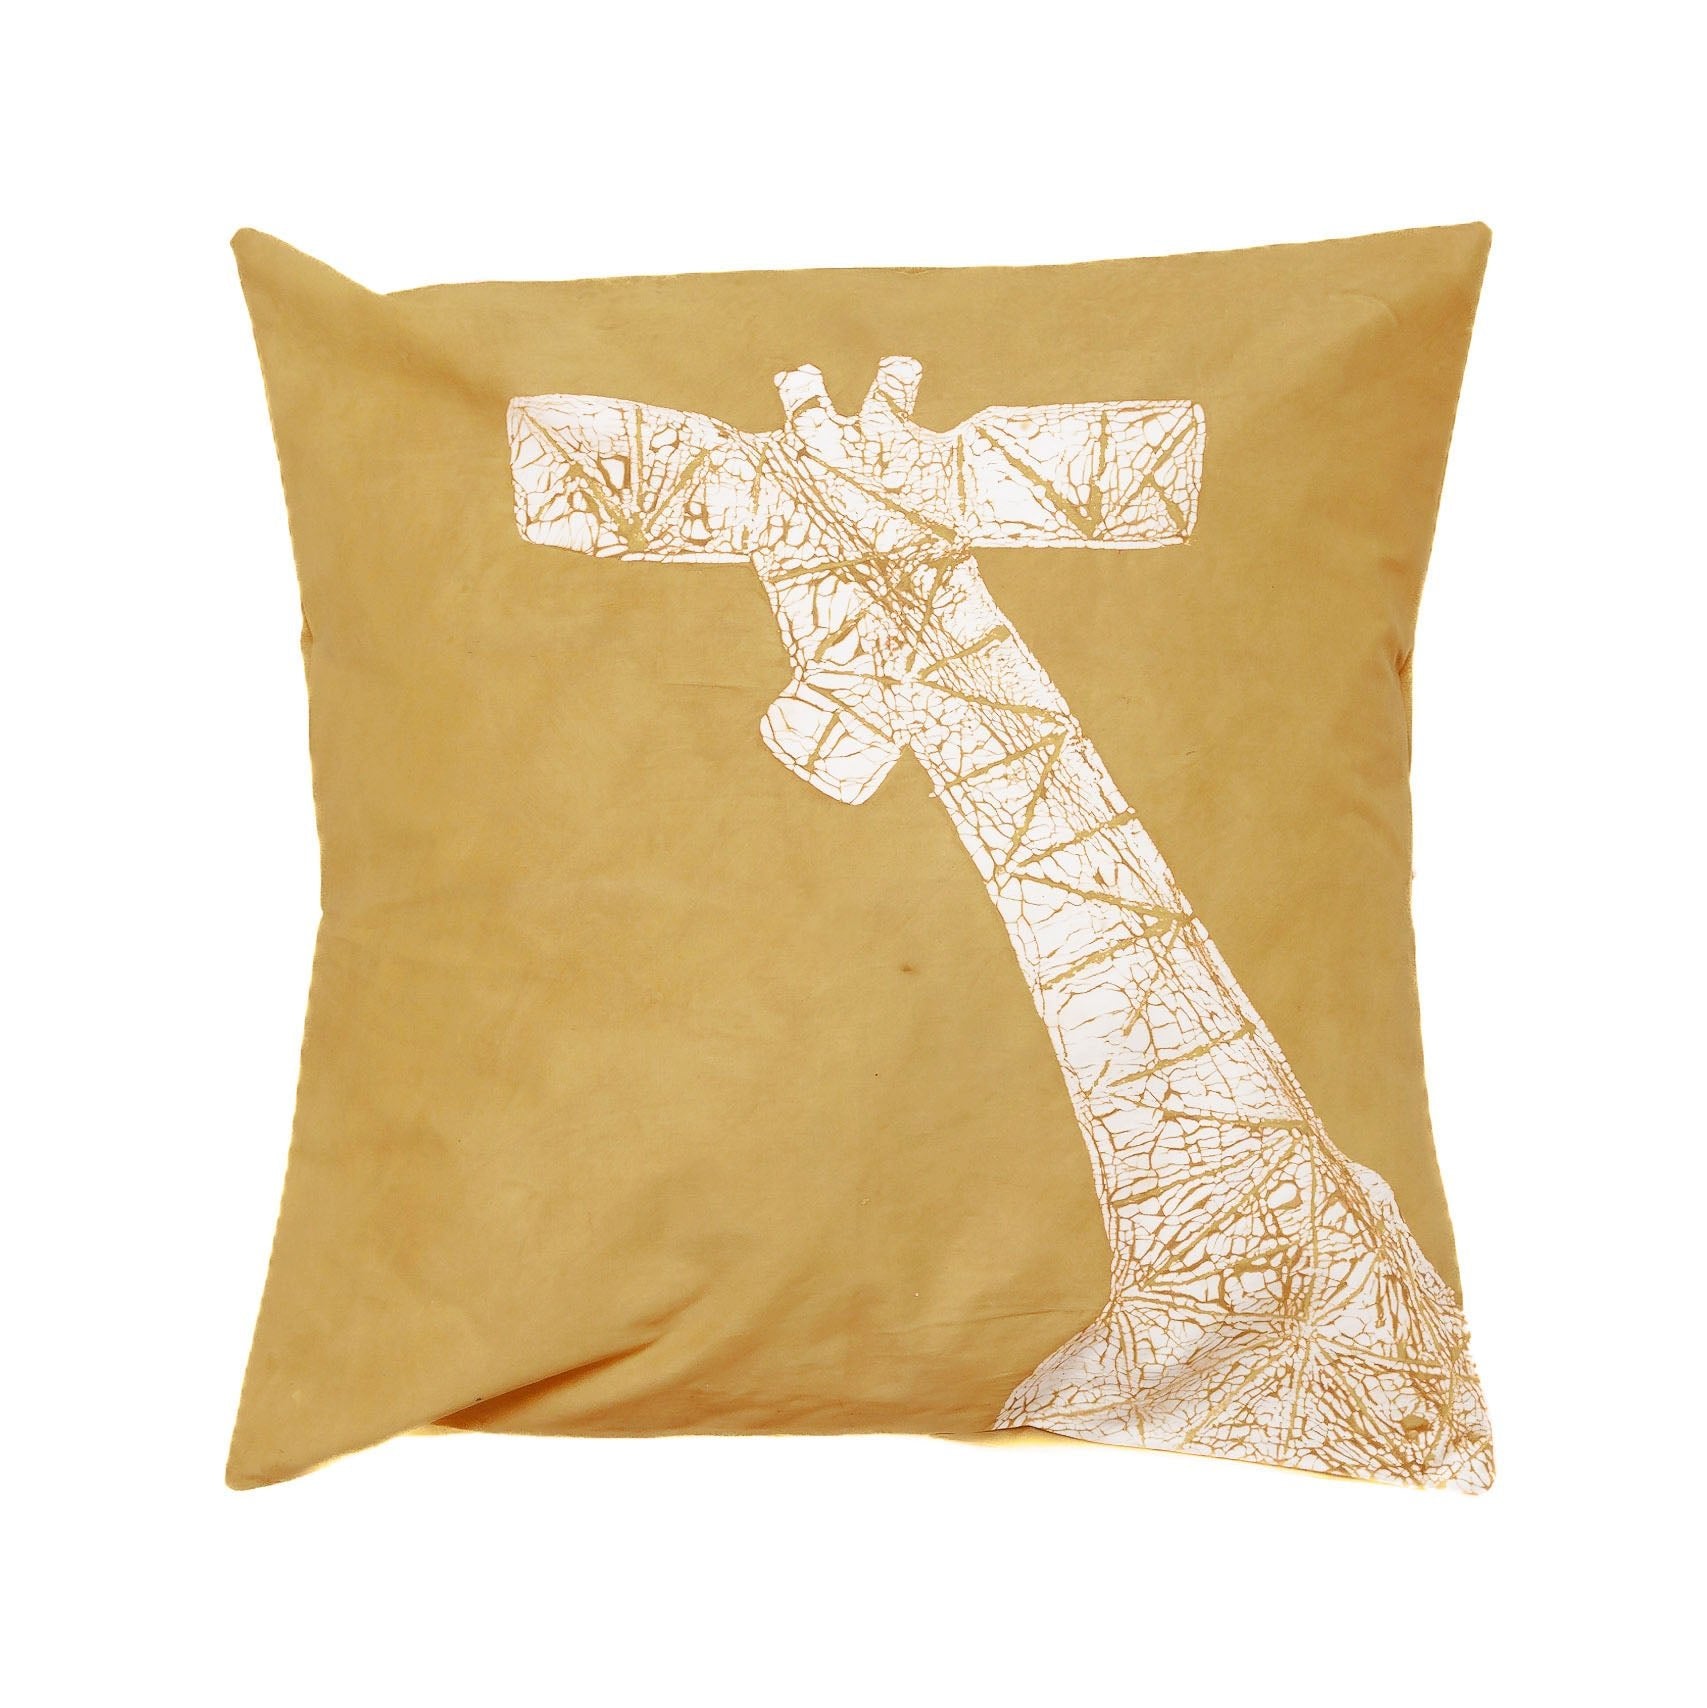 Mwana Giraffe Cushion Cover - Mustard - Hand Painted by TRIBAL TEXTILES - Handcrafted Home Decor Interiors - African Made